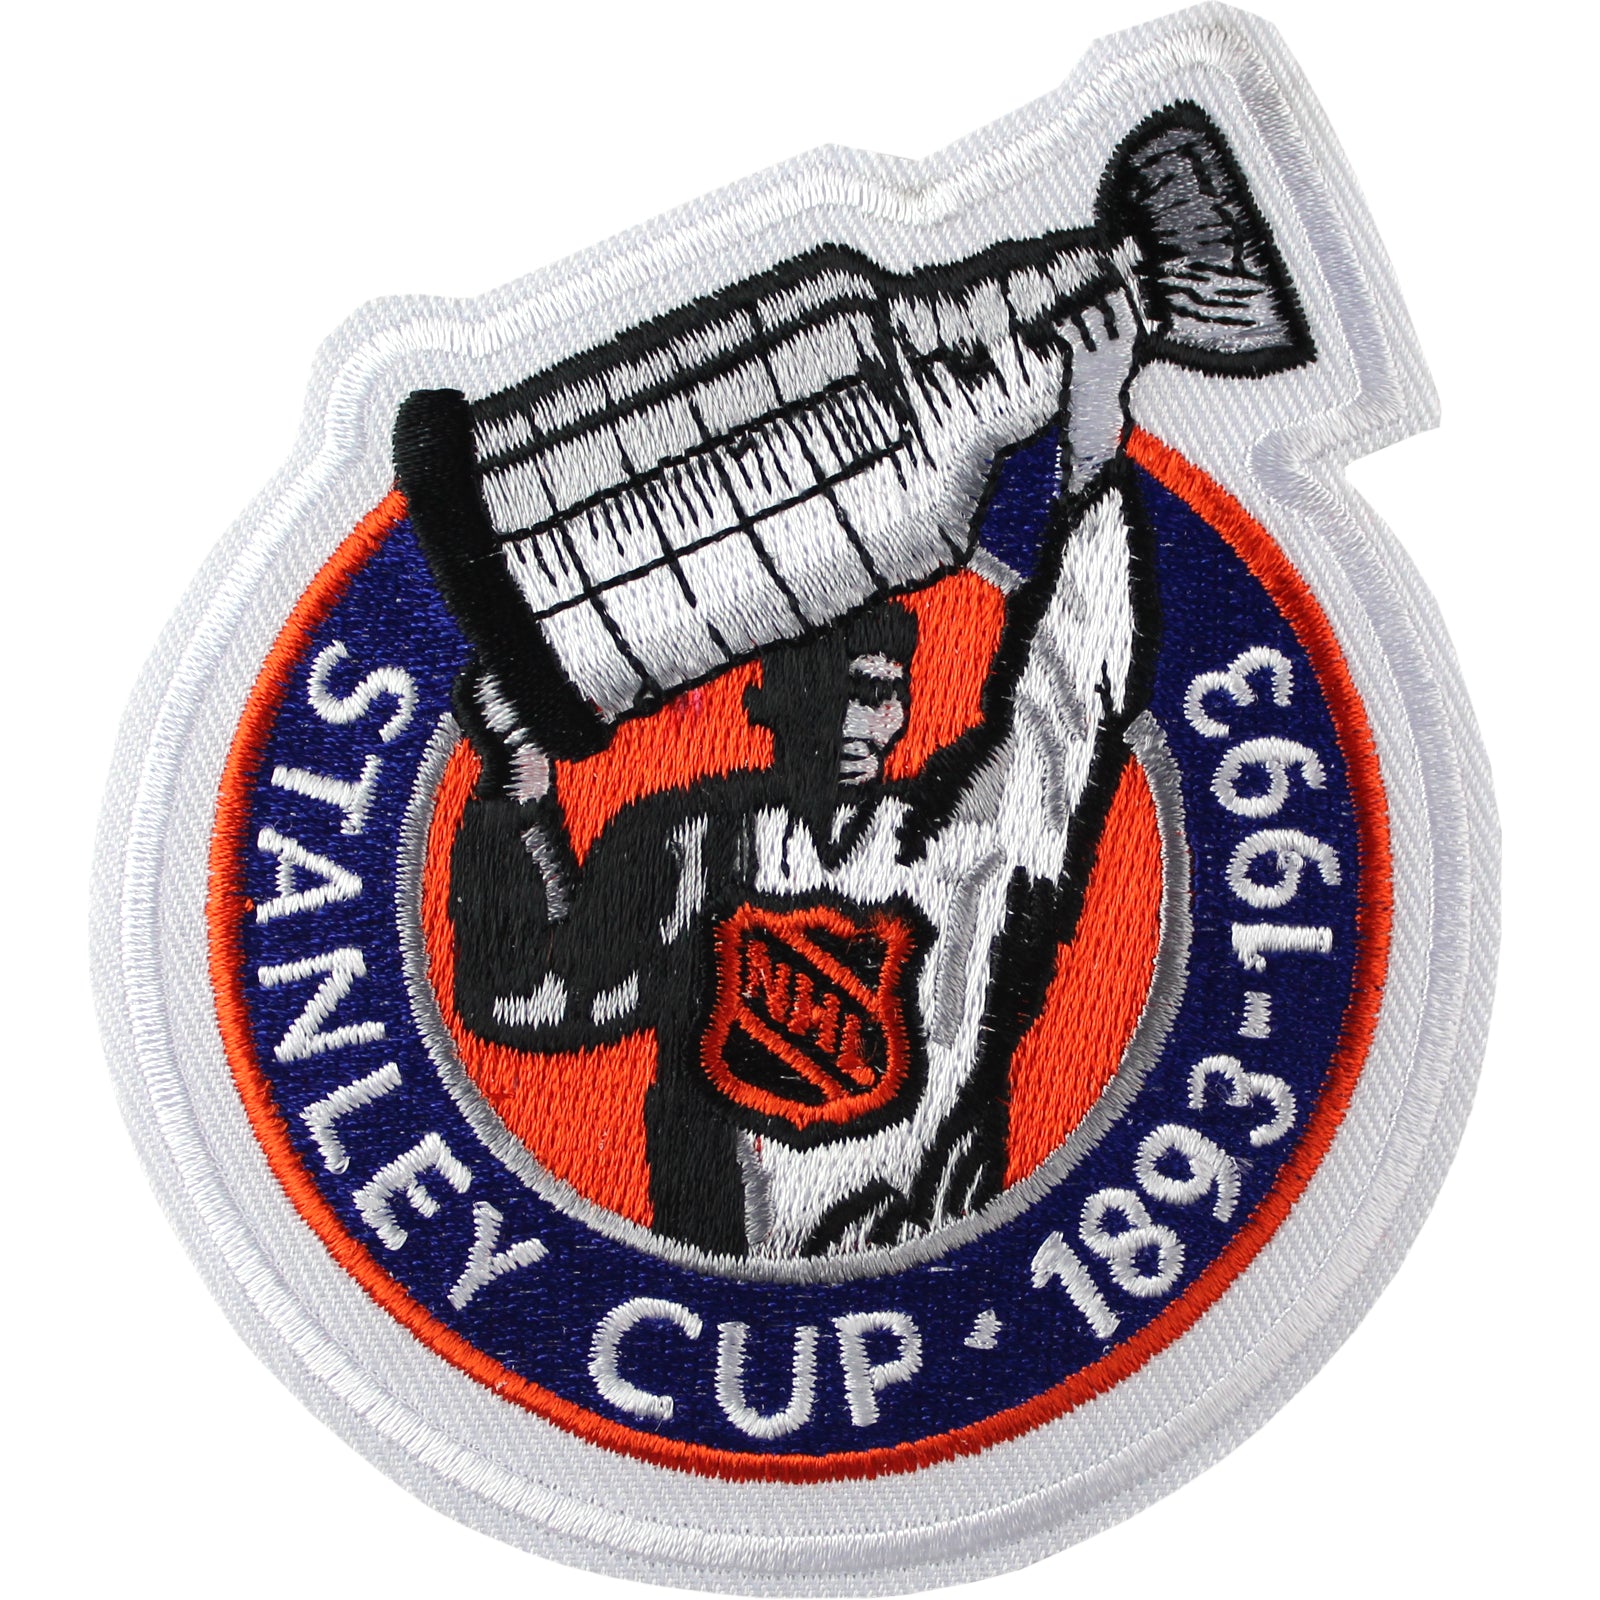 STANLEY CUP FINALS - LOS ANGELES KINGS vs. MONTREAL CANADIENS LARGE 1993  PATCH